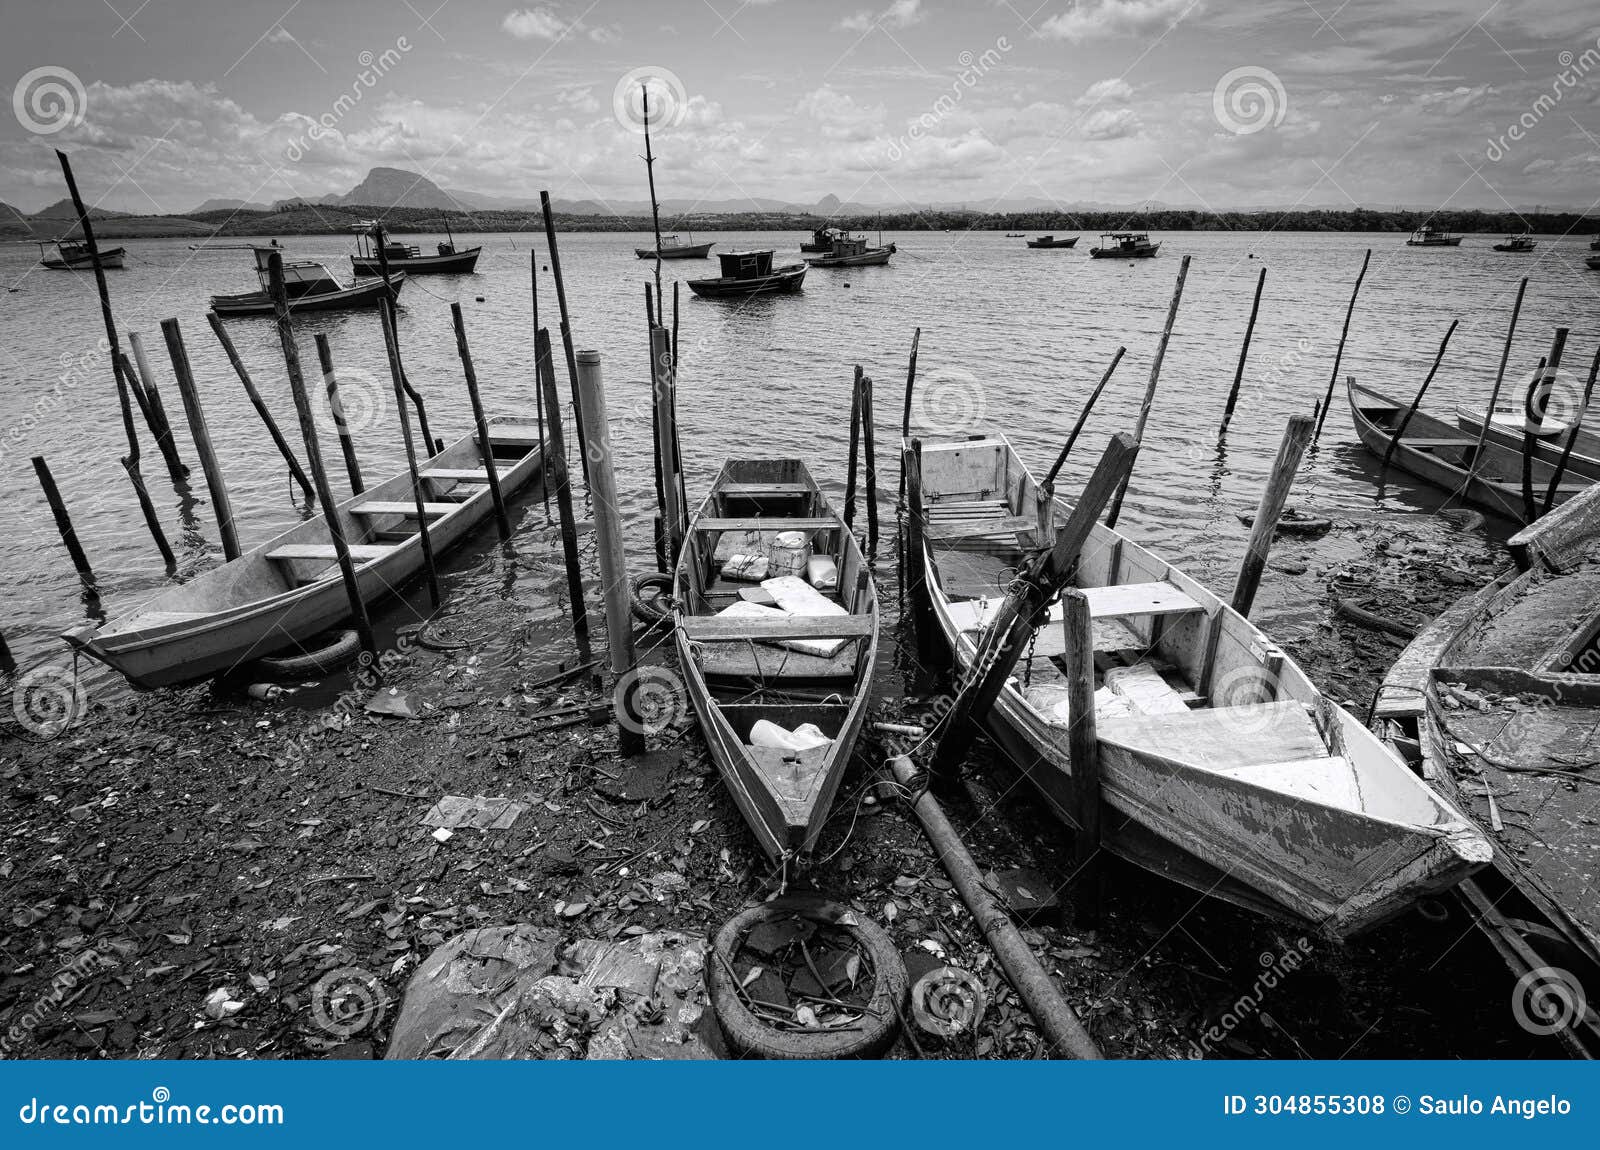 local wooden fishing boats in the shore